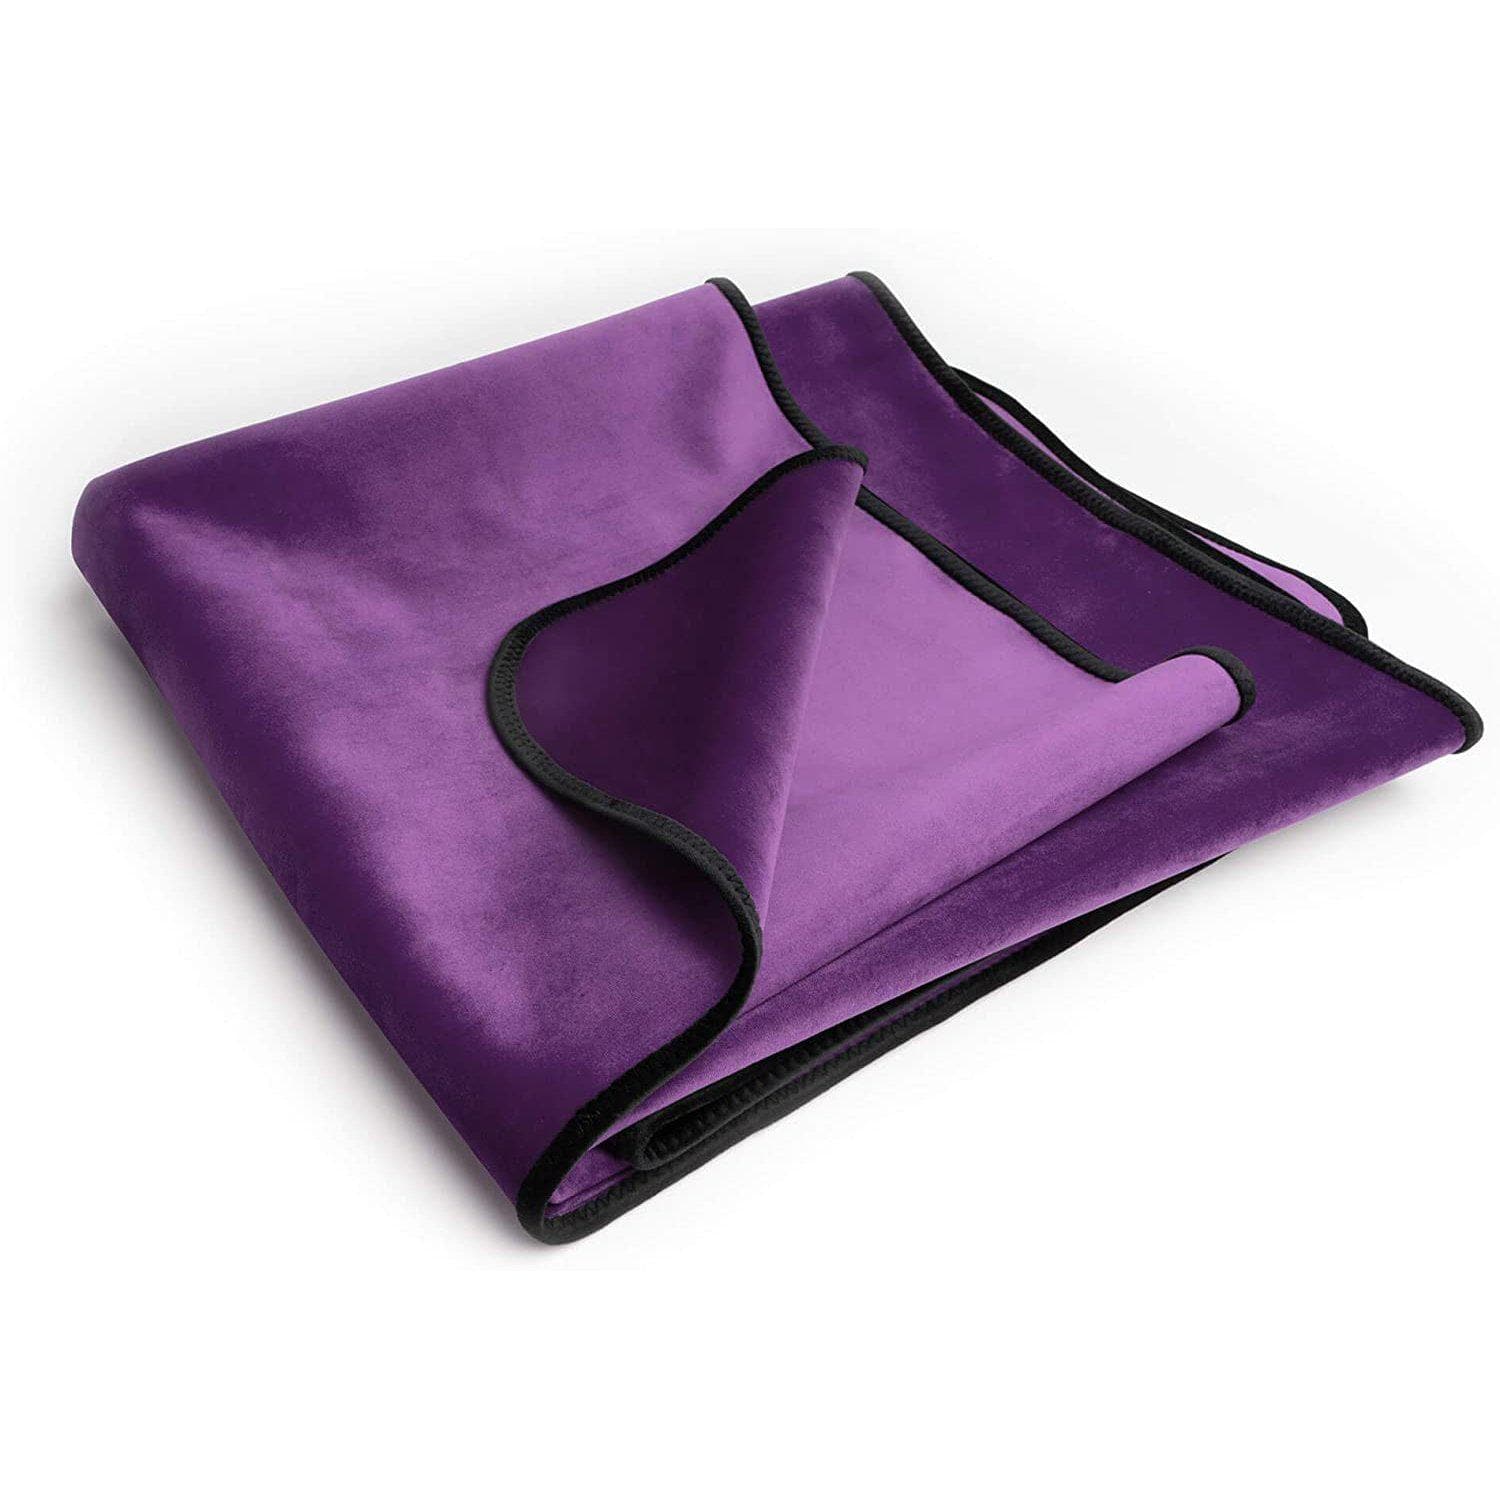 Liberator Fascinator Lush Throw Water Barrier Sexual Blanket King Size - Romantic Blessings